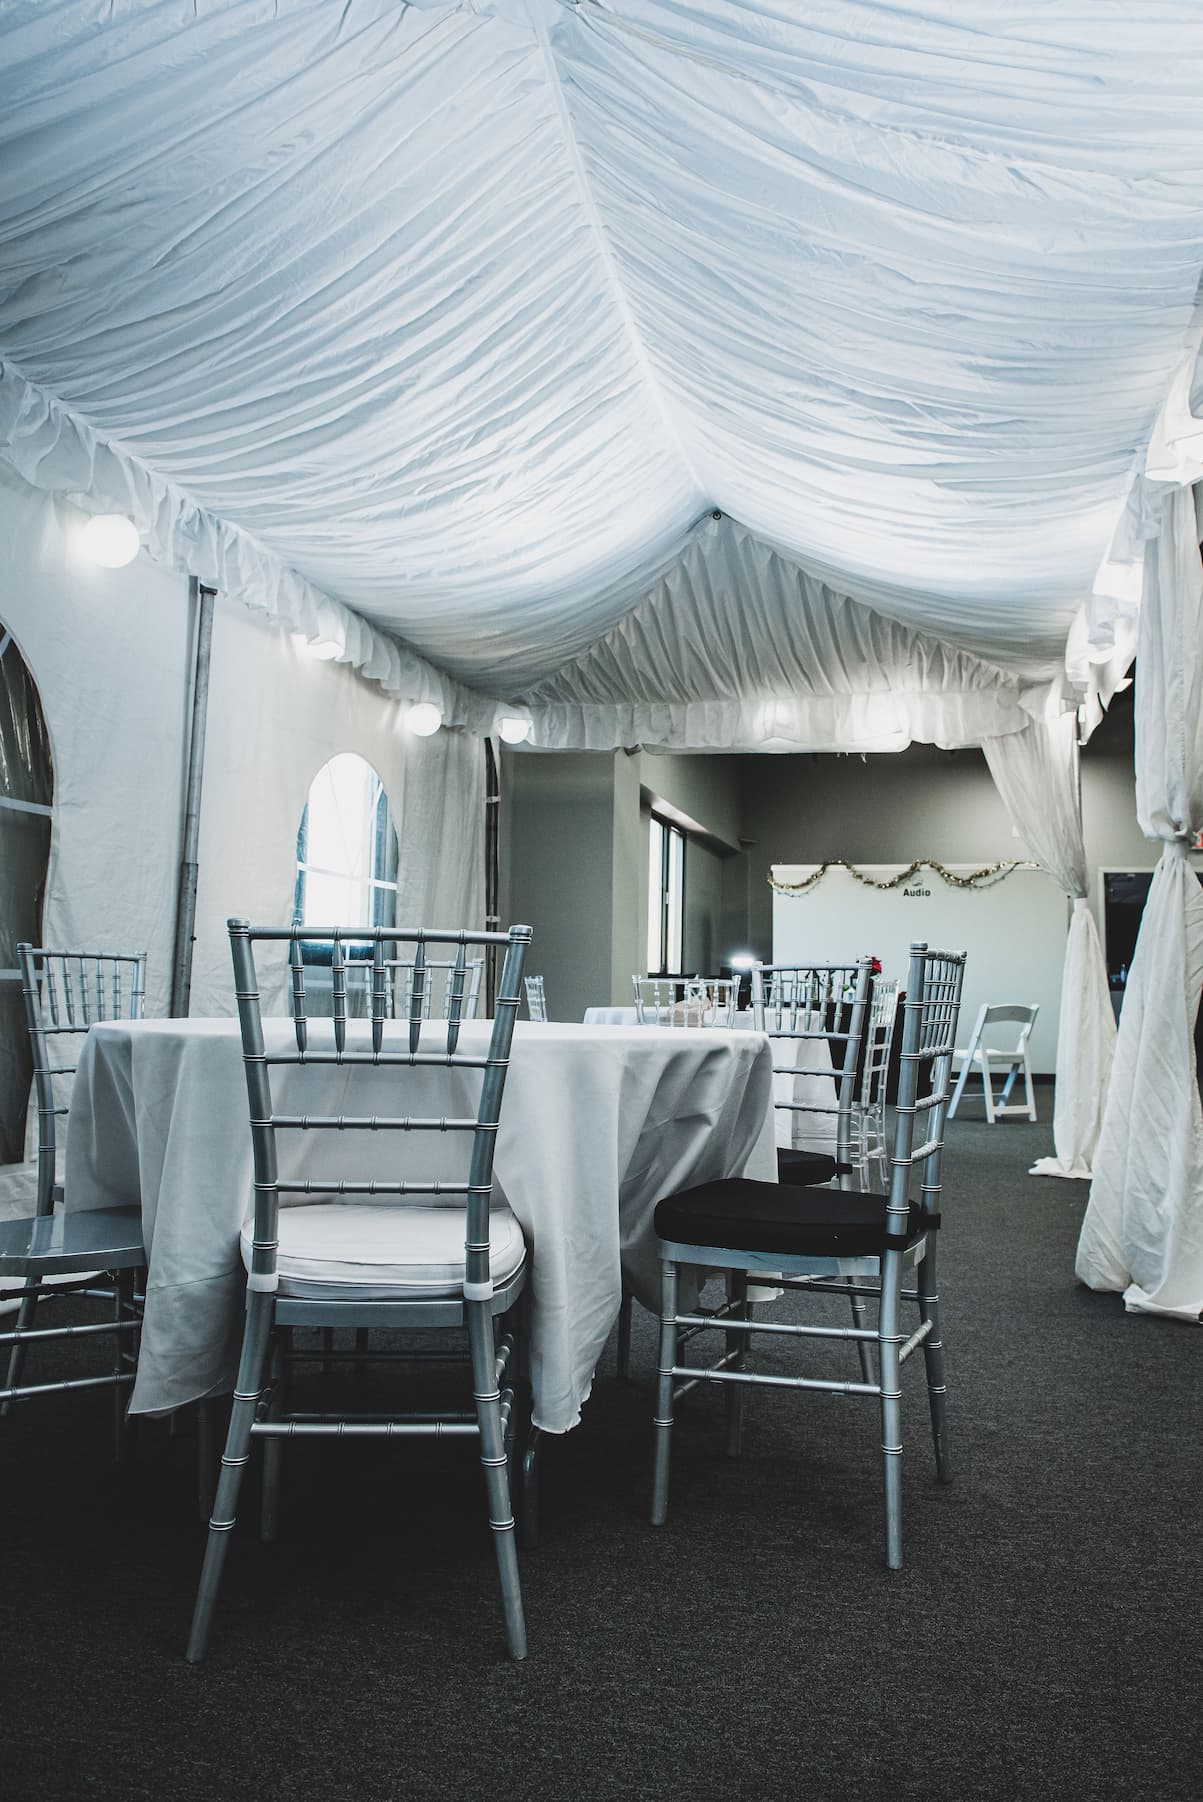 chairs set up under a wedding tent